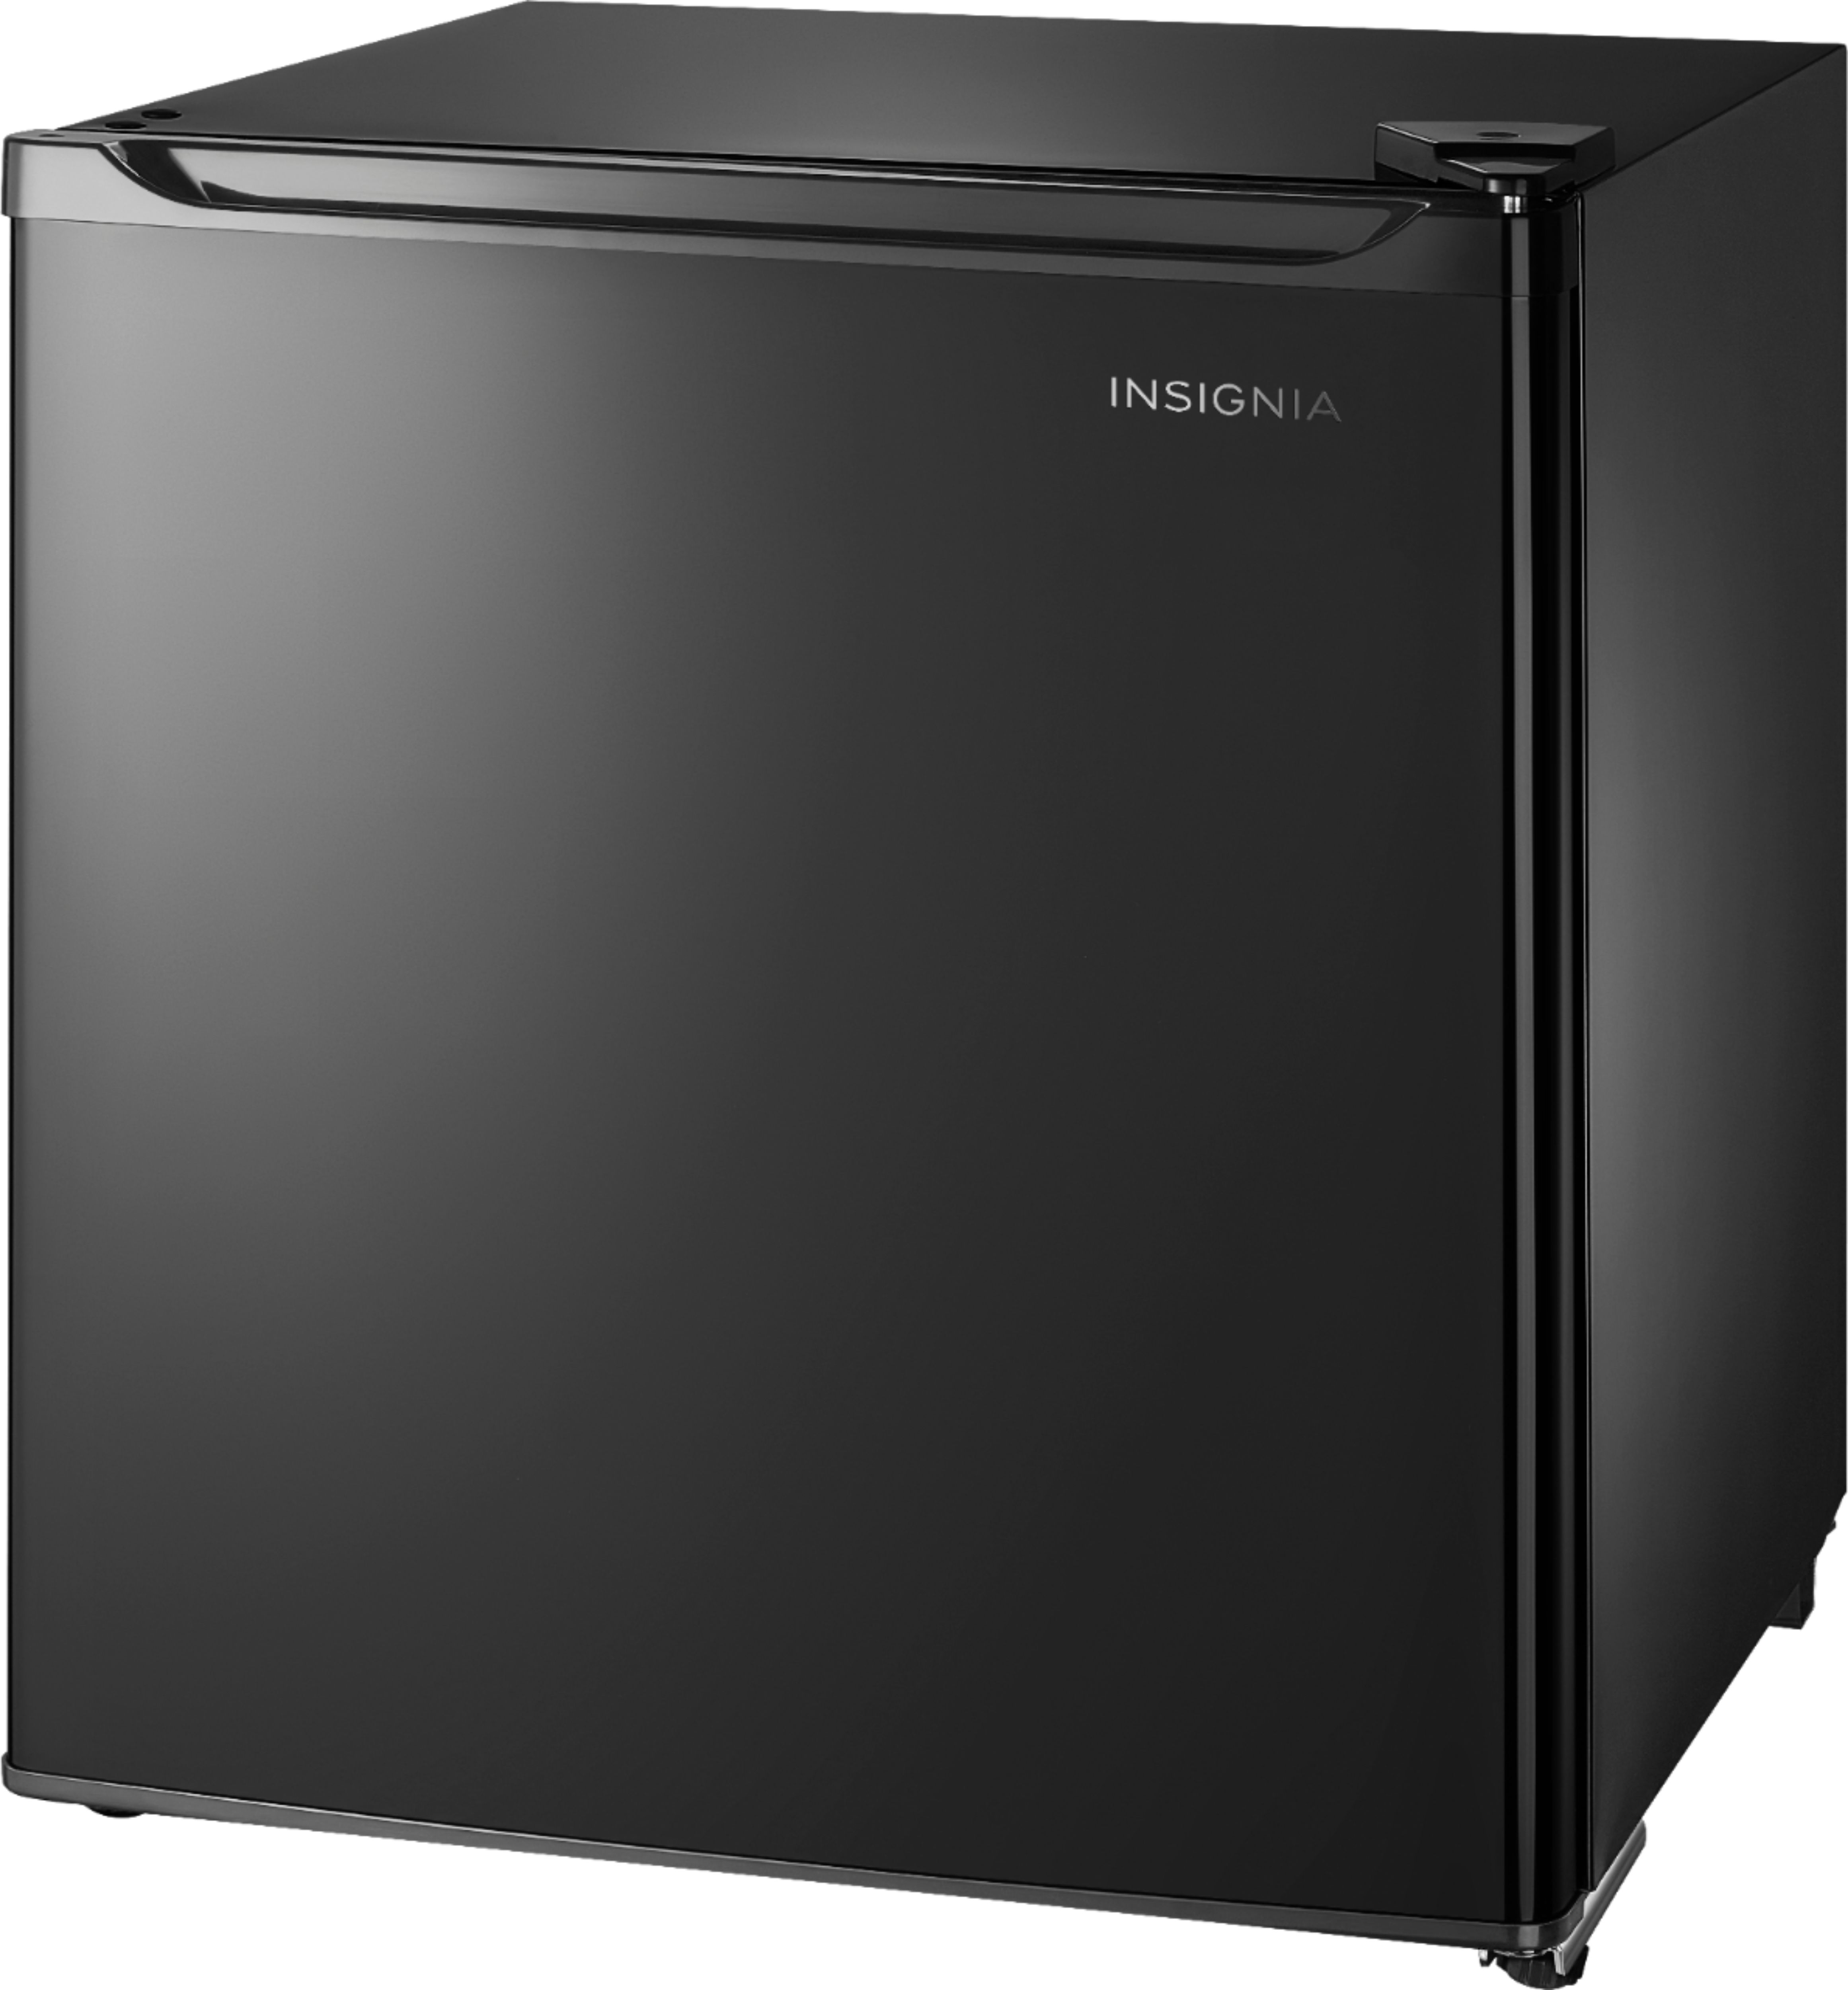 Angle View: Insignia™ - 1.7 Cu. Ft. Mini Fridge with ENERGY STAR Certification - Black